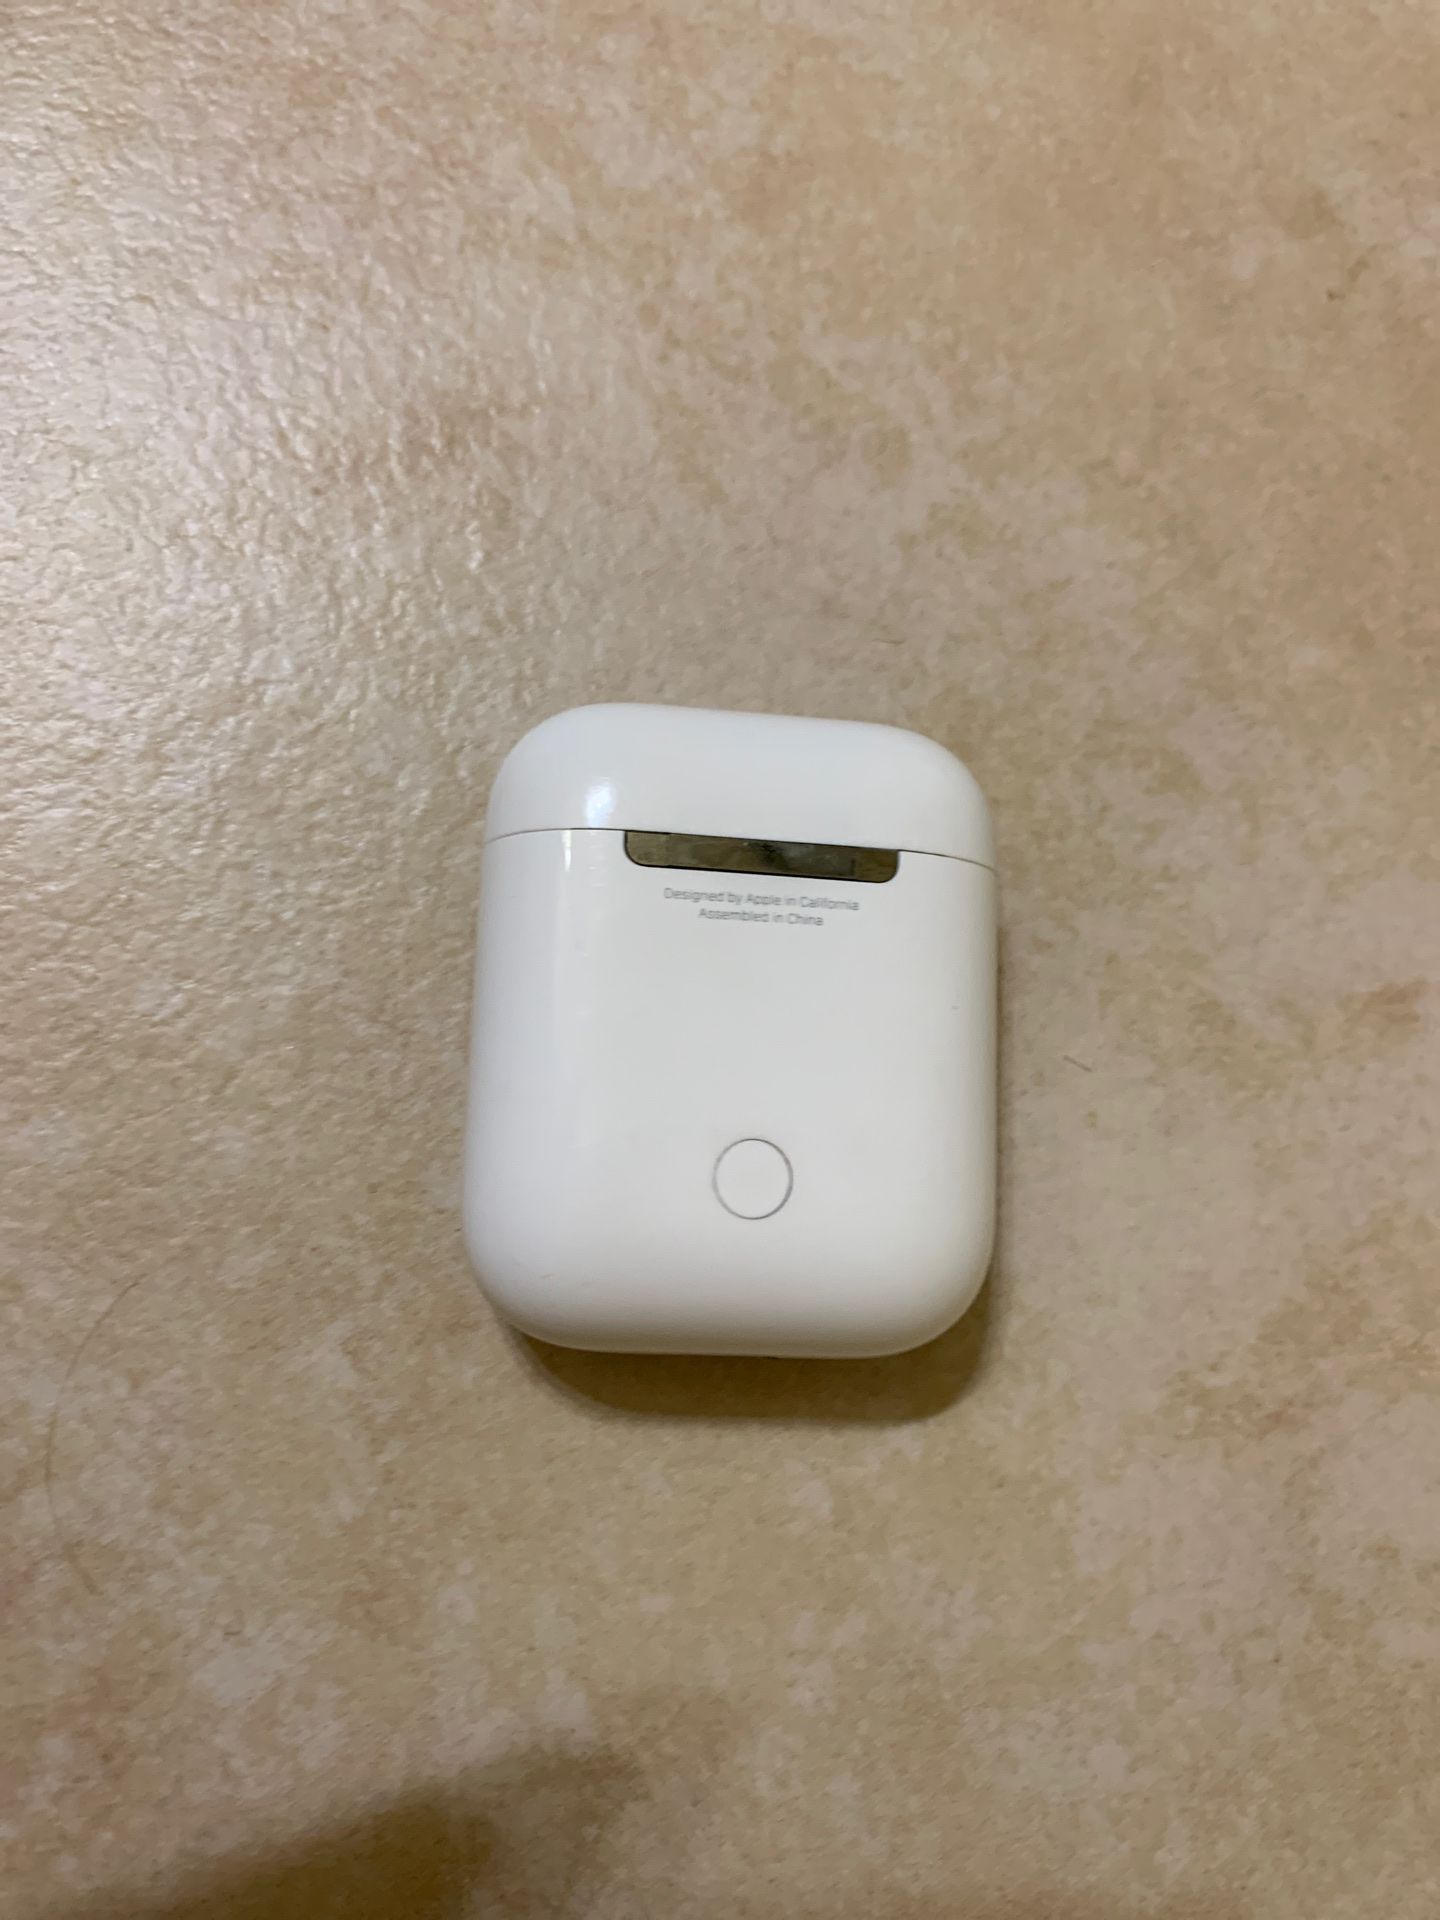 Charging Case for AirPods. Apple.